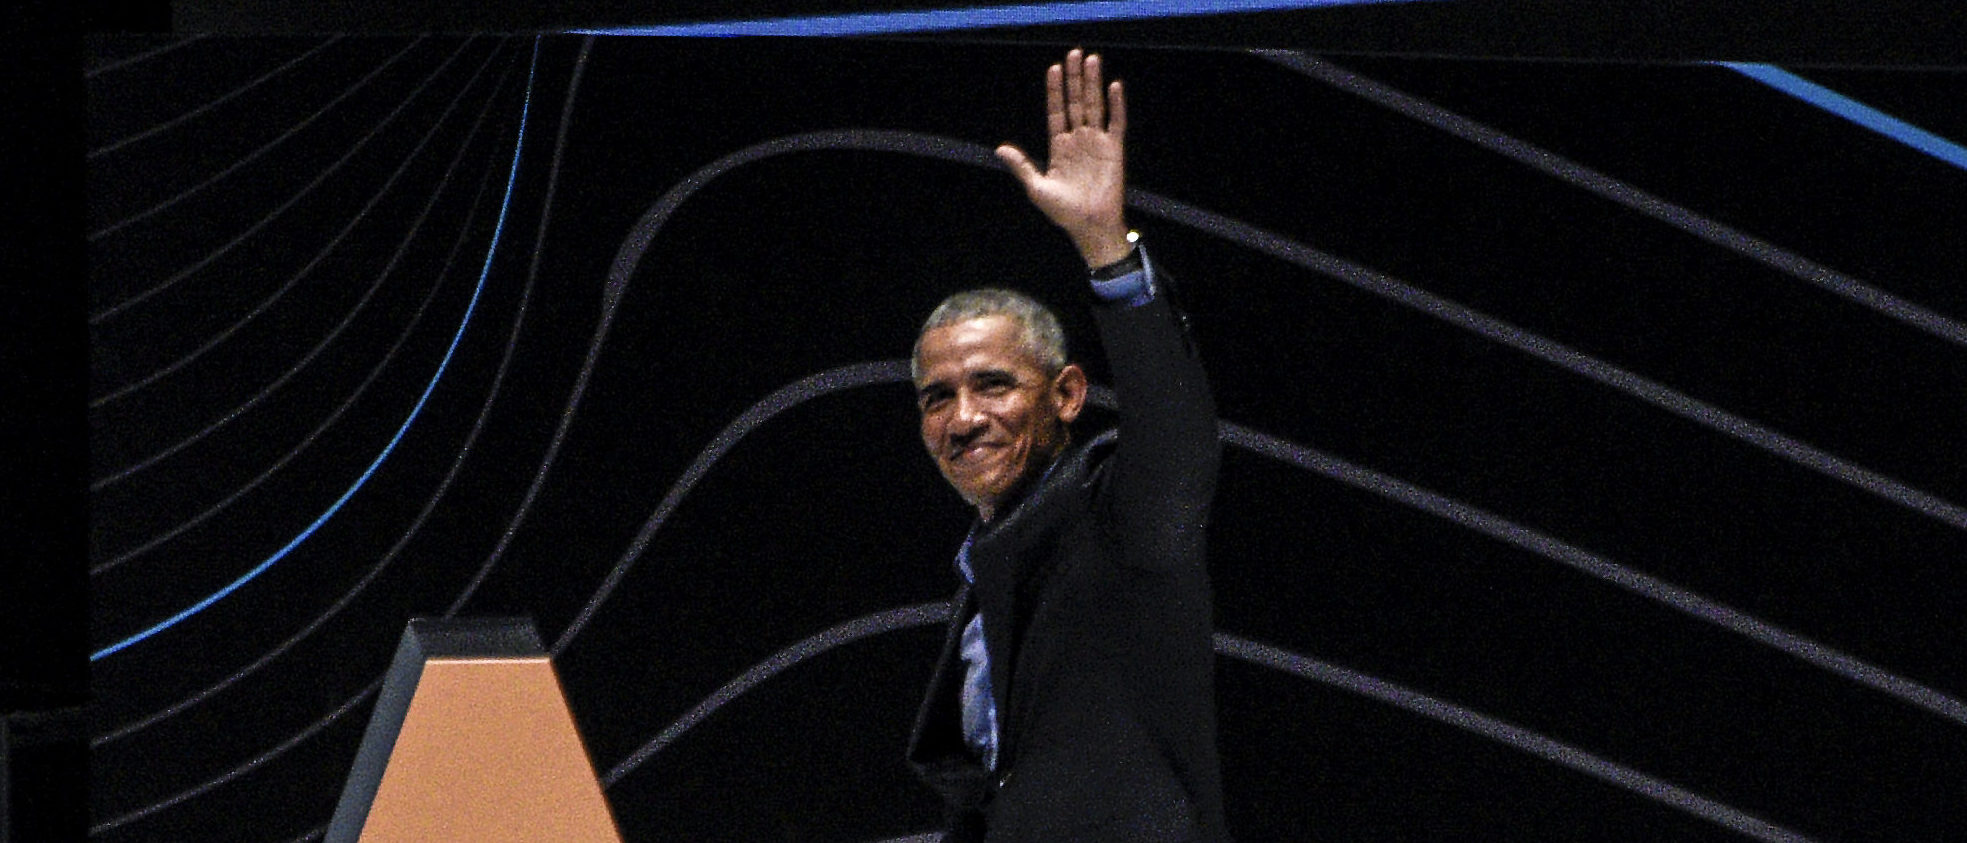 BOGOTA, COLOMBIA - MAY 28: Former U.S. President Barack Obama waves at the end of his conference on EXMA Congress Bogota 2019 at Arena Movistar on May 28, 2019 in Bogota, Colombia. (Photo by Guillermo Legaria/Getty Images)